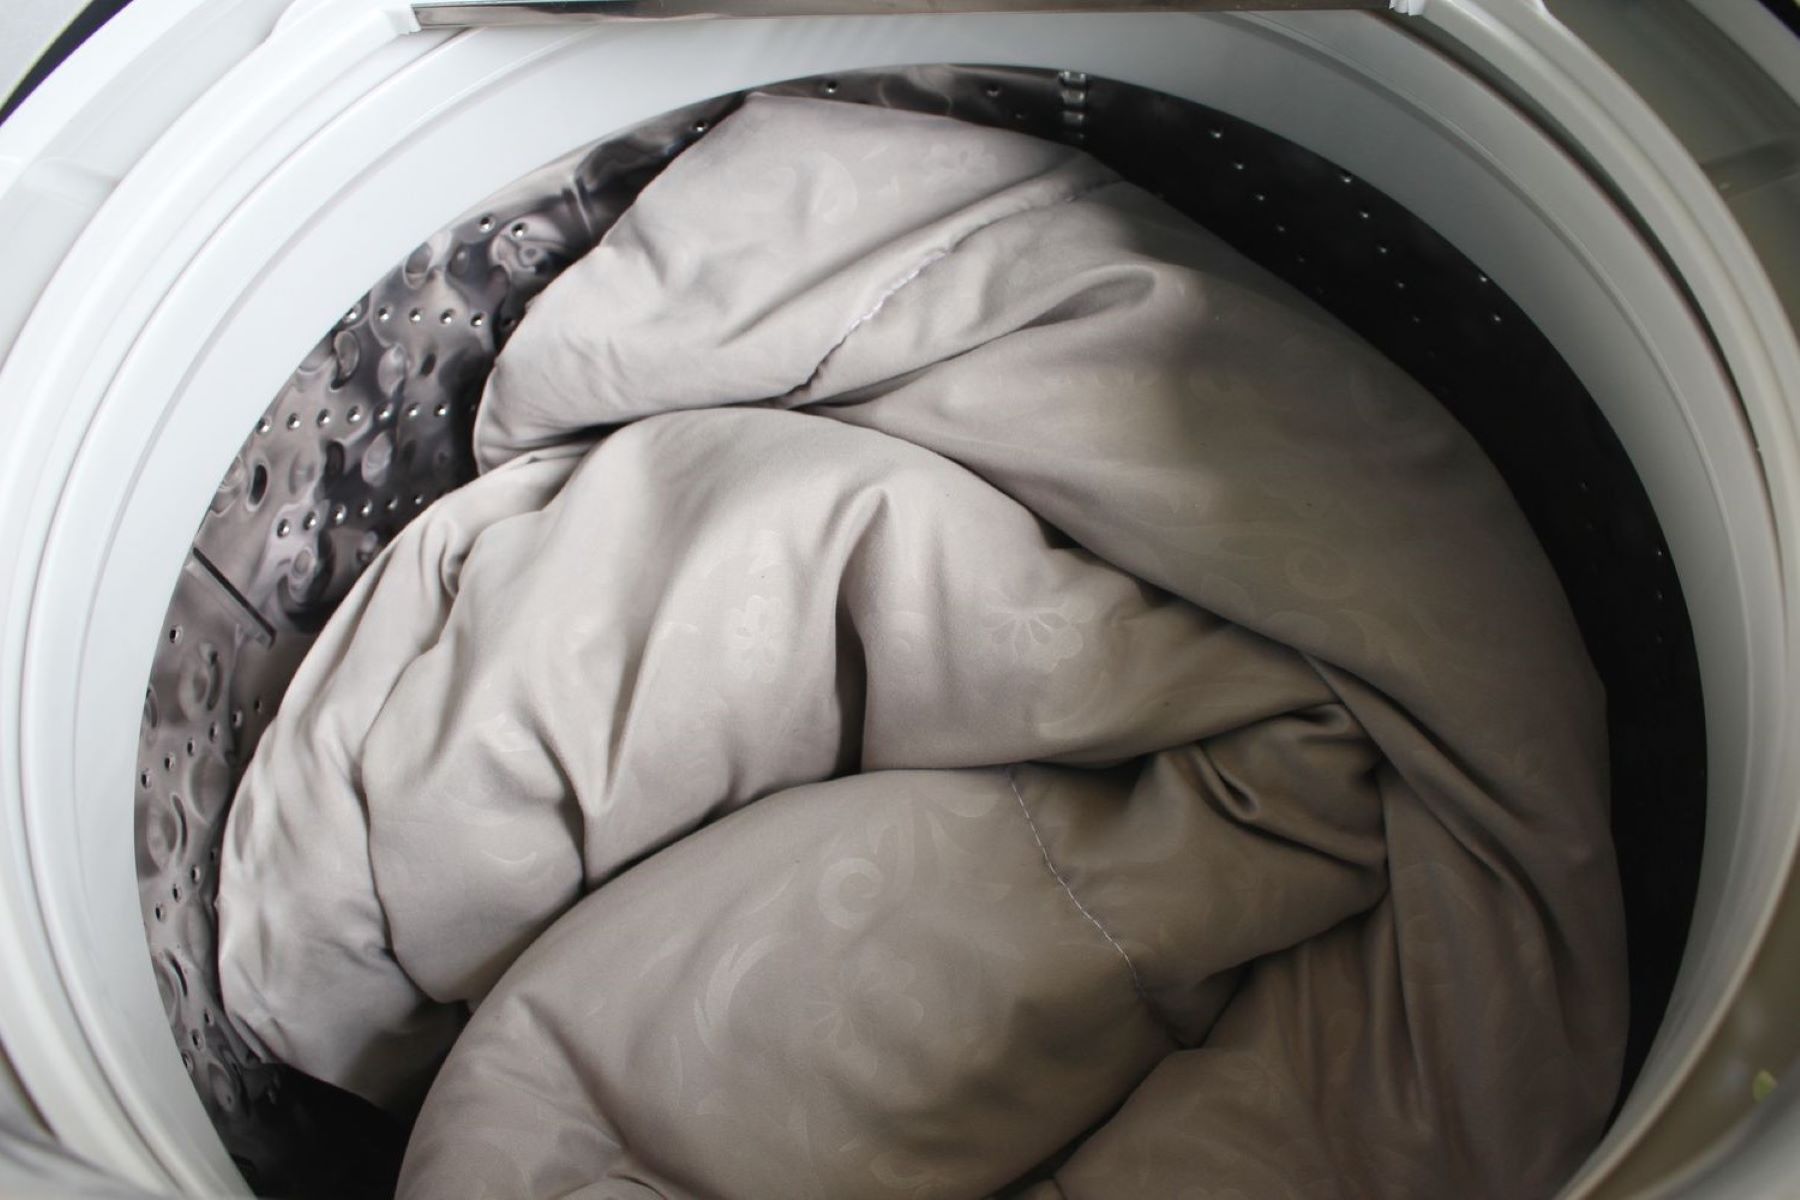 How To Wash A Comforter In The Washing Machine